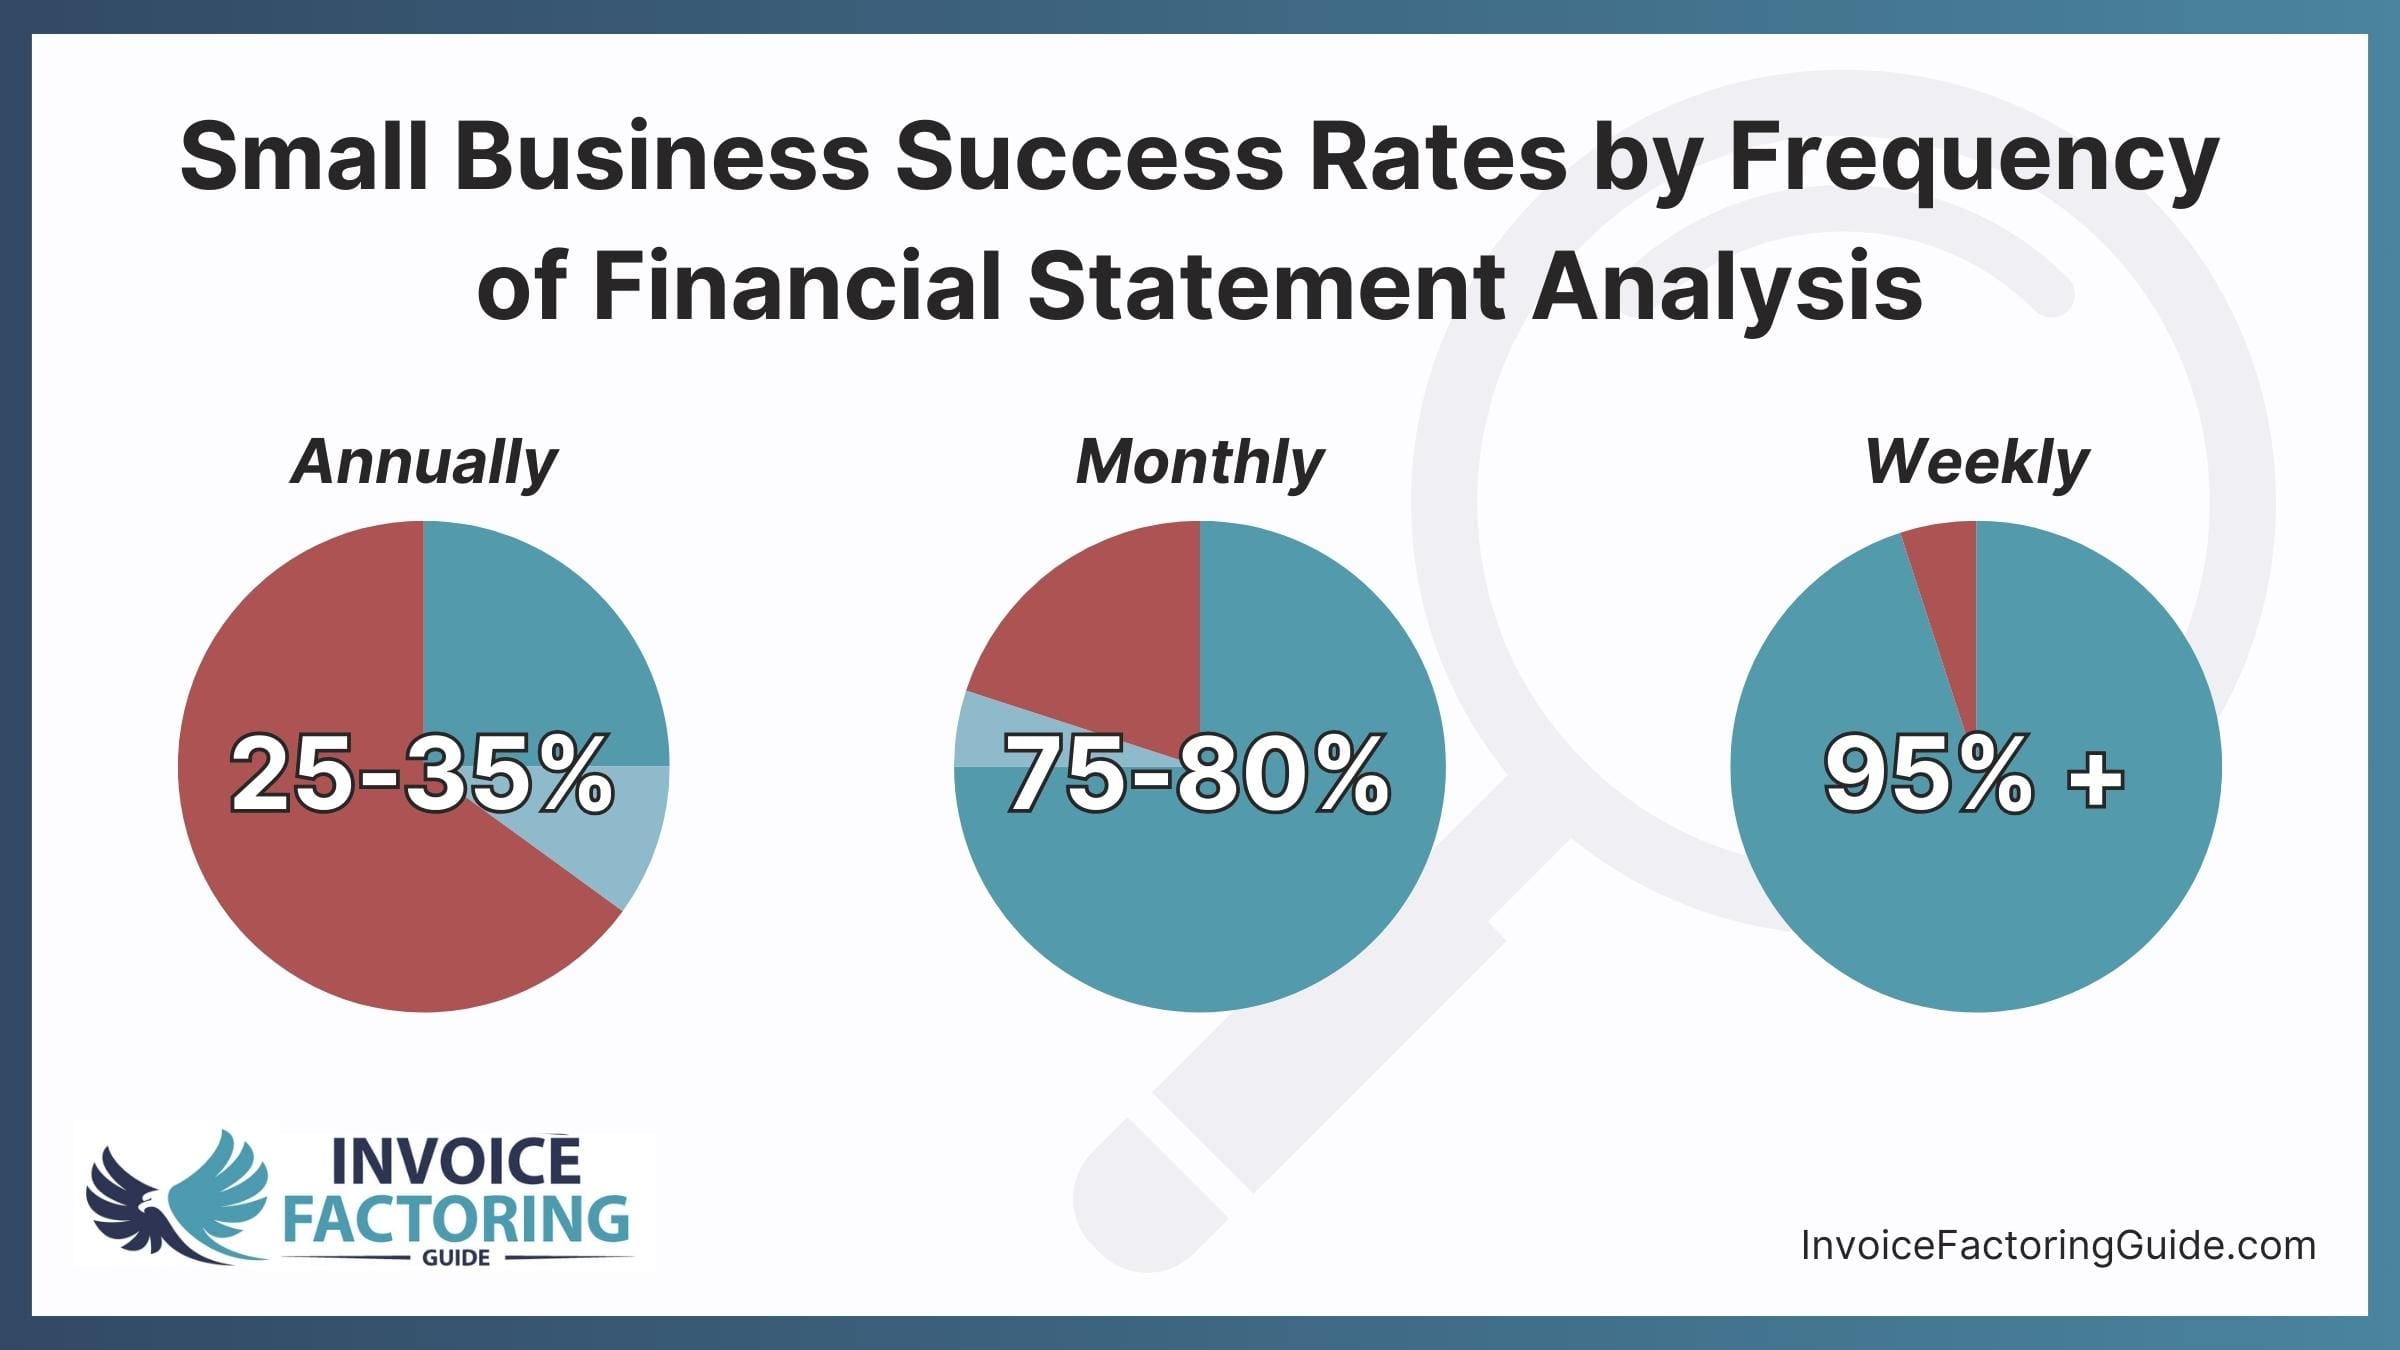 Small business success rates by frequency of financial statement analysis